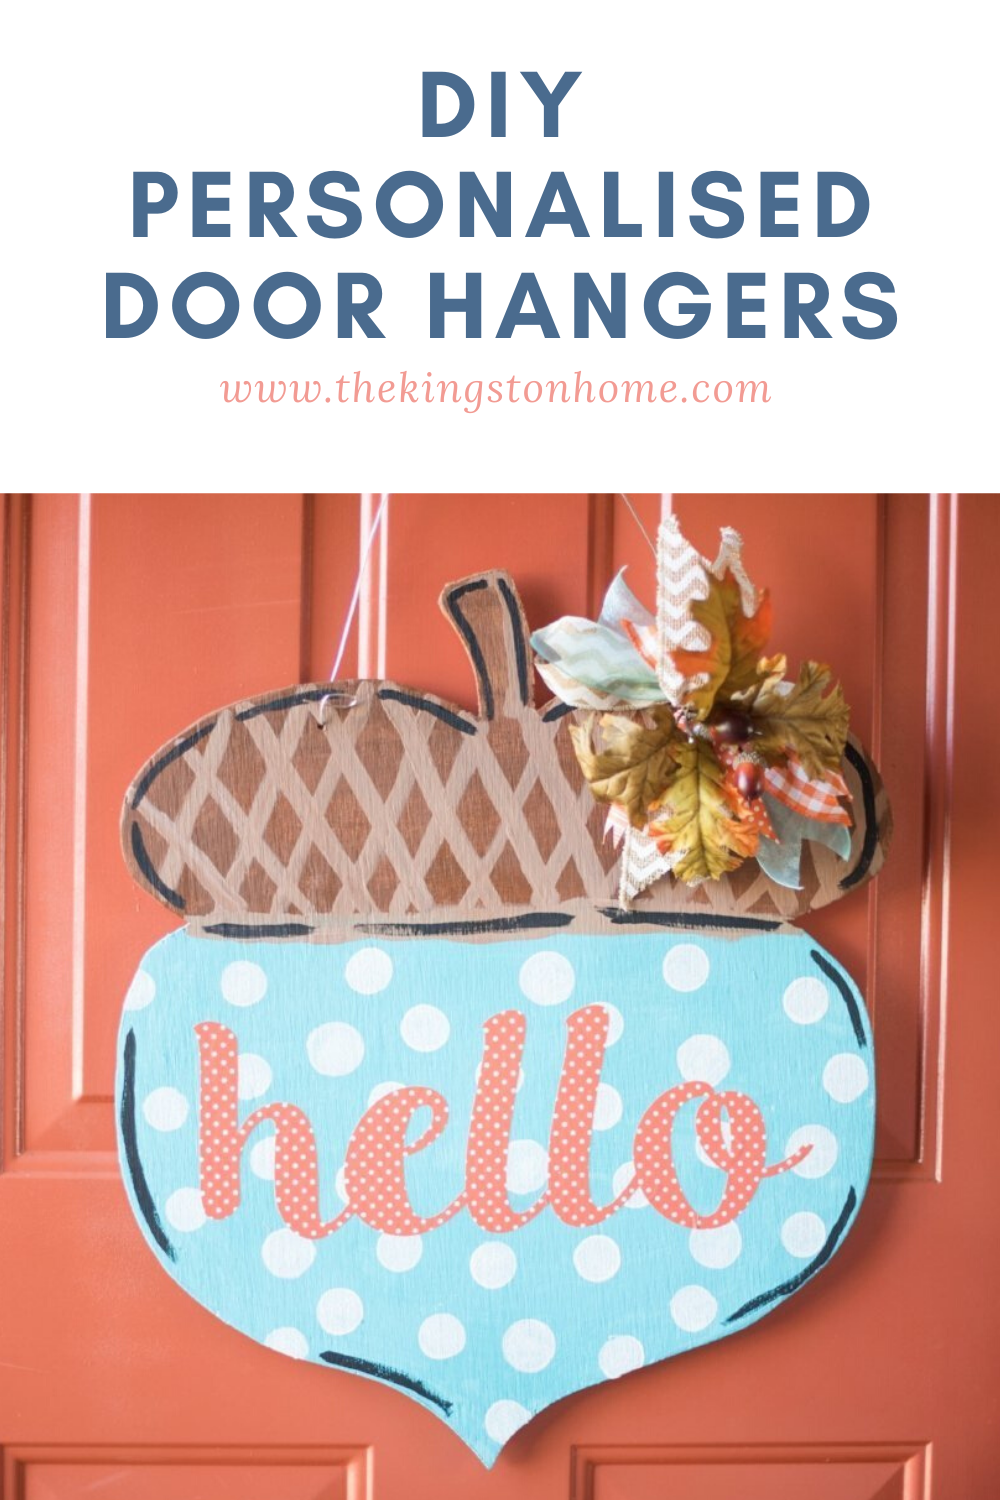 How to Design and Hang Personalized Door Hangers - The Kingston Home: In just a few minutes with your Cricut EasyPress you can personalize wood door hangers without worrying about your terrible handwriting! via @craftykingstons